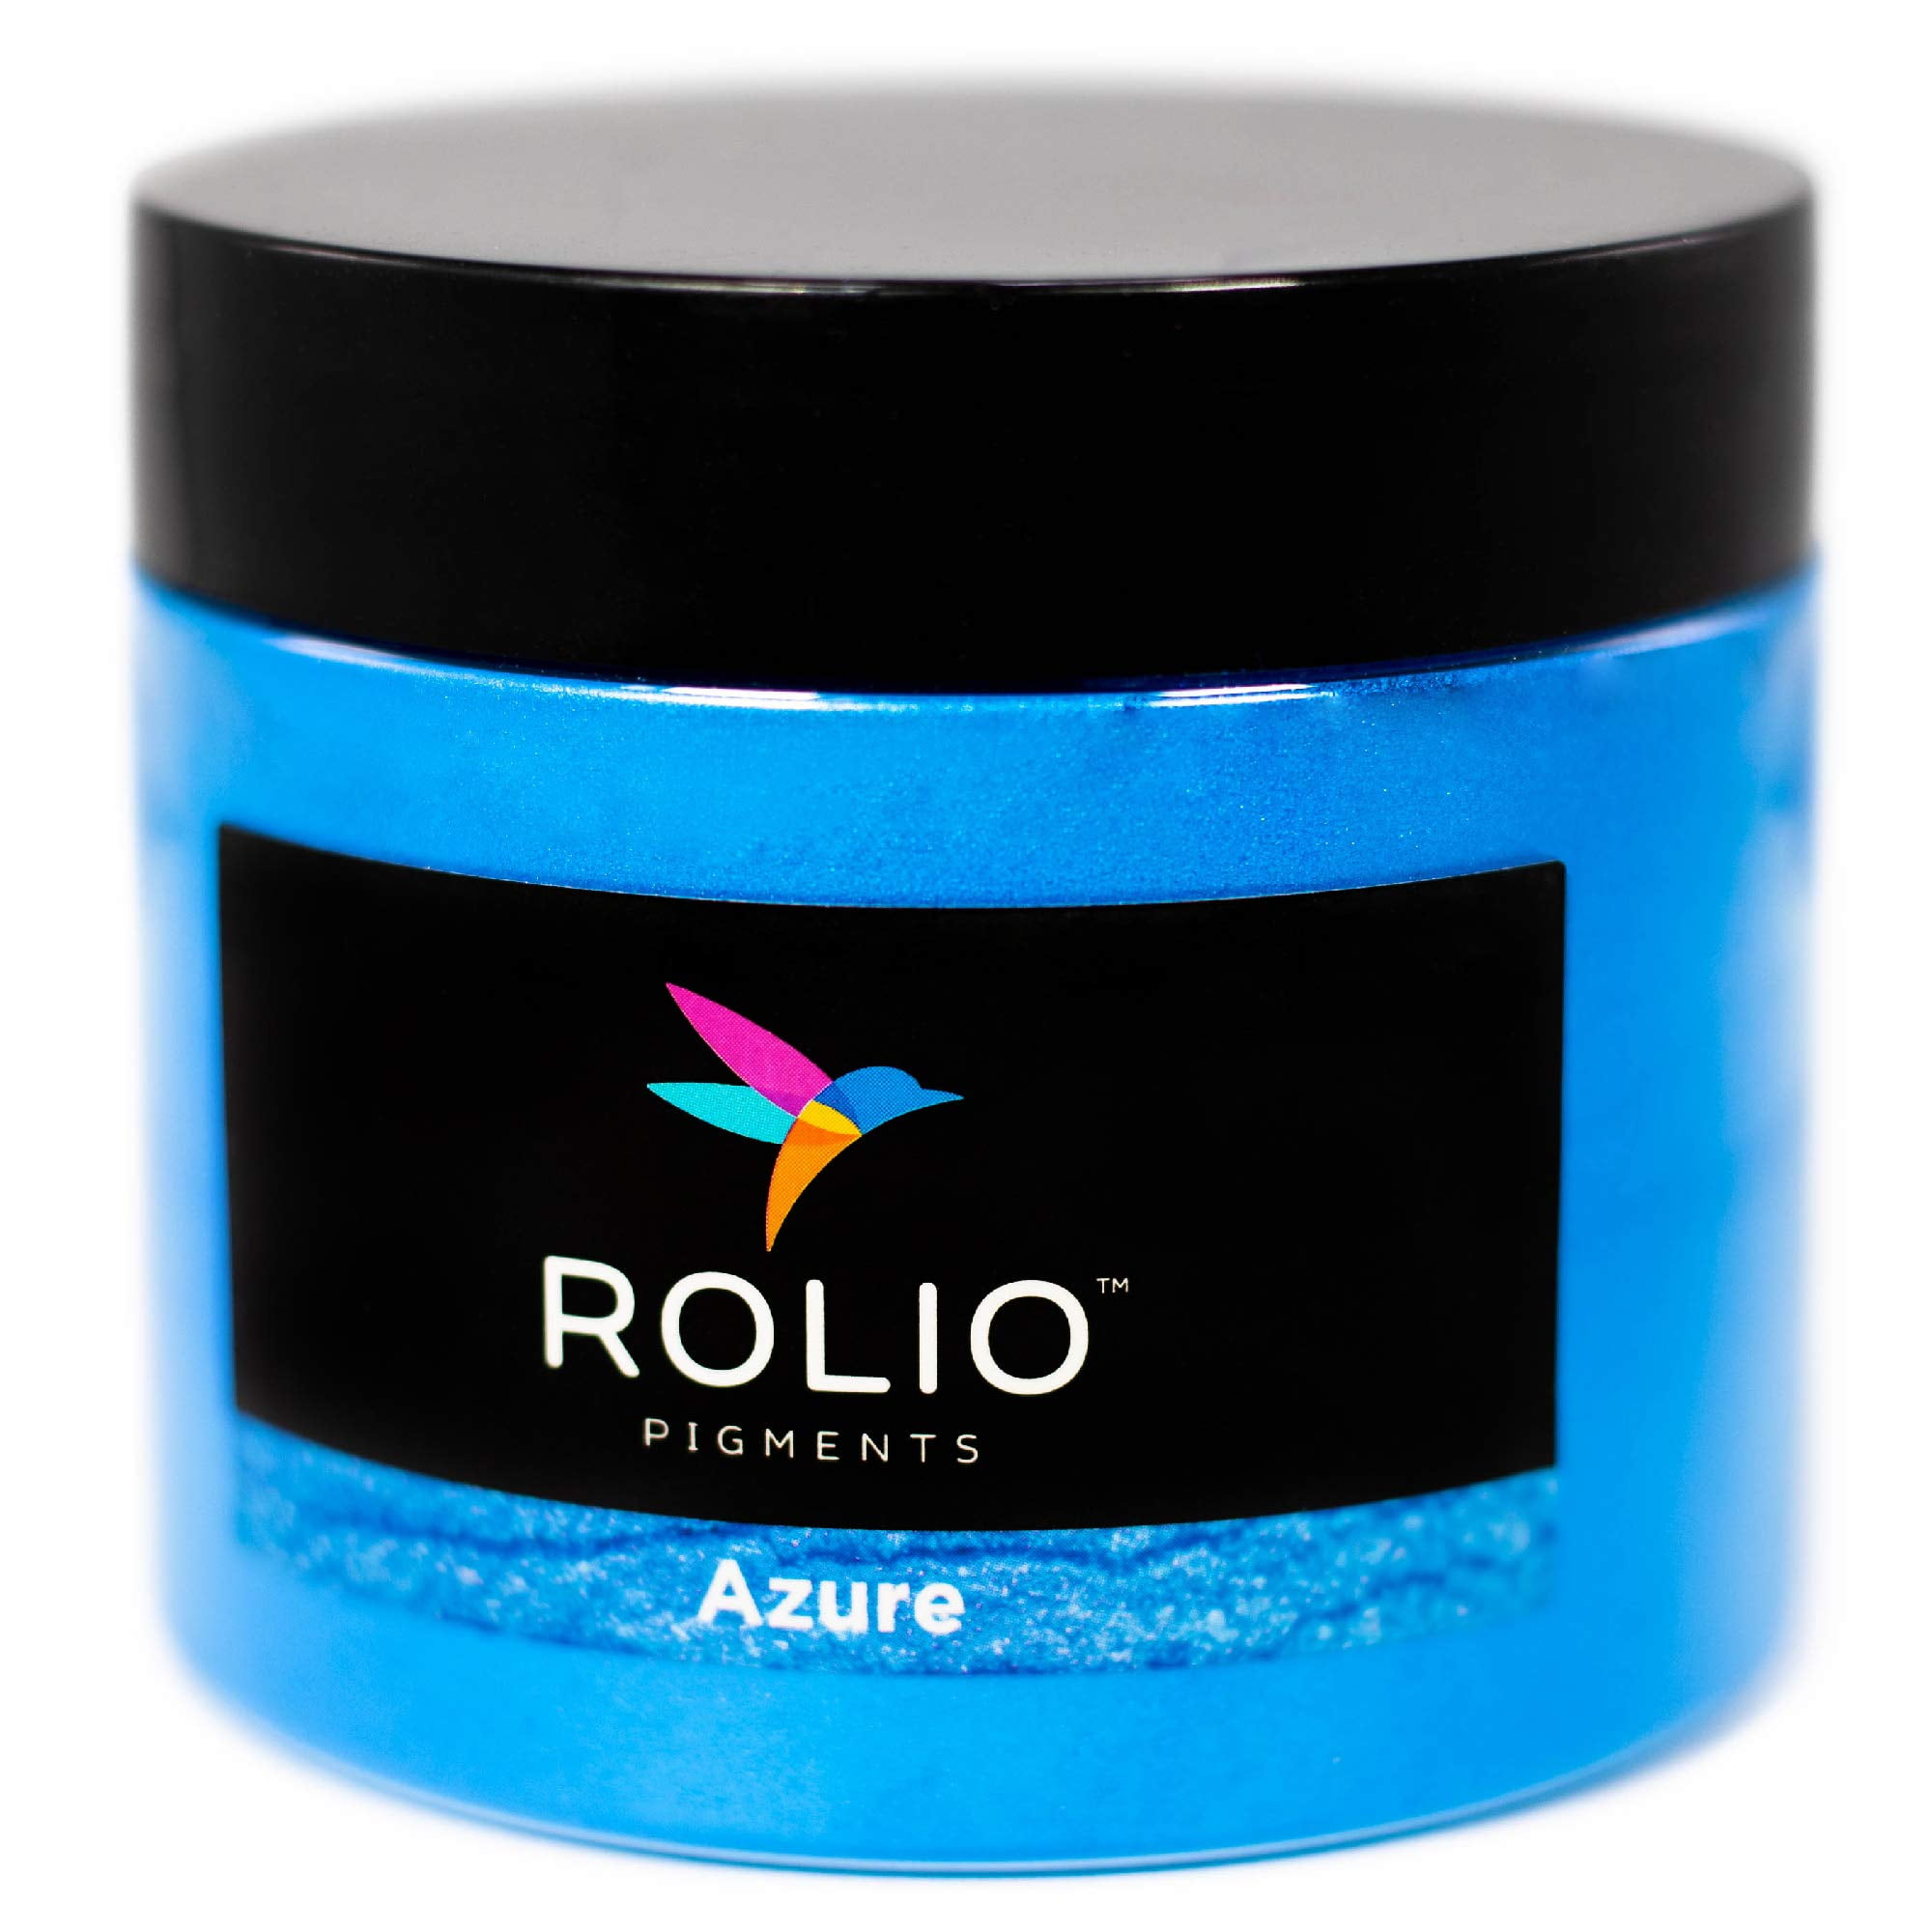  Rolio - Mica Powder - 1 Jar of Pigment for Paint, Dye, Soap  Making, Nail Polish, Epoxy Resin, Candle Making, Bath Bombs, Slime - 50G /  1.76oz (Deep Pink)